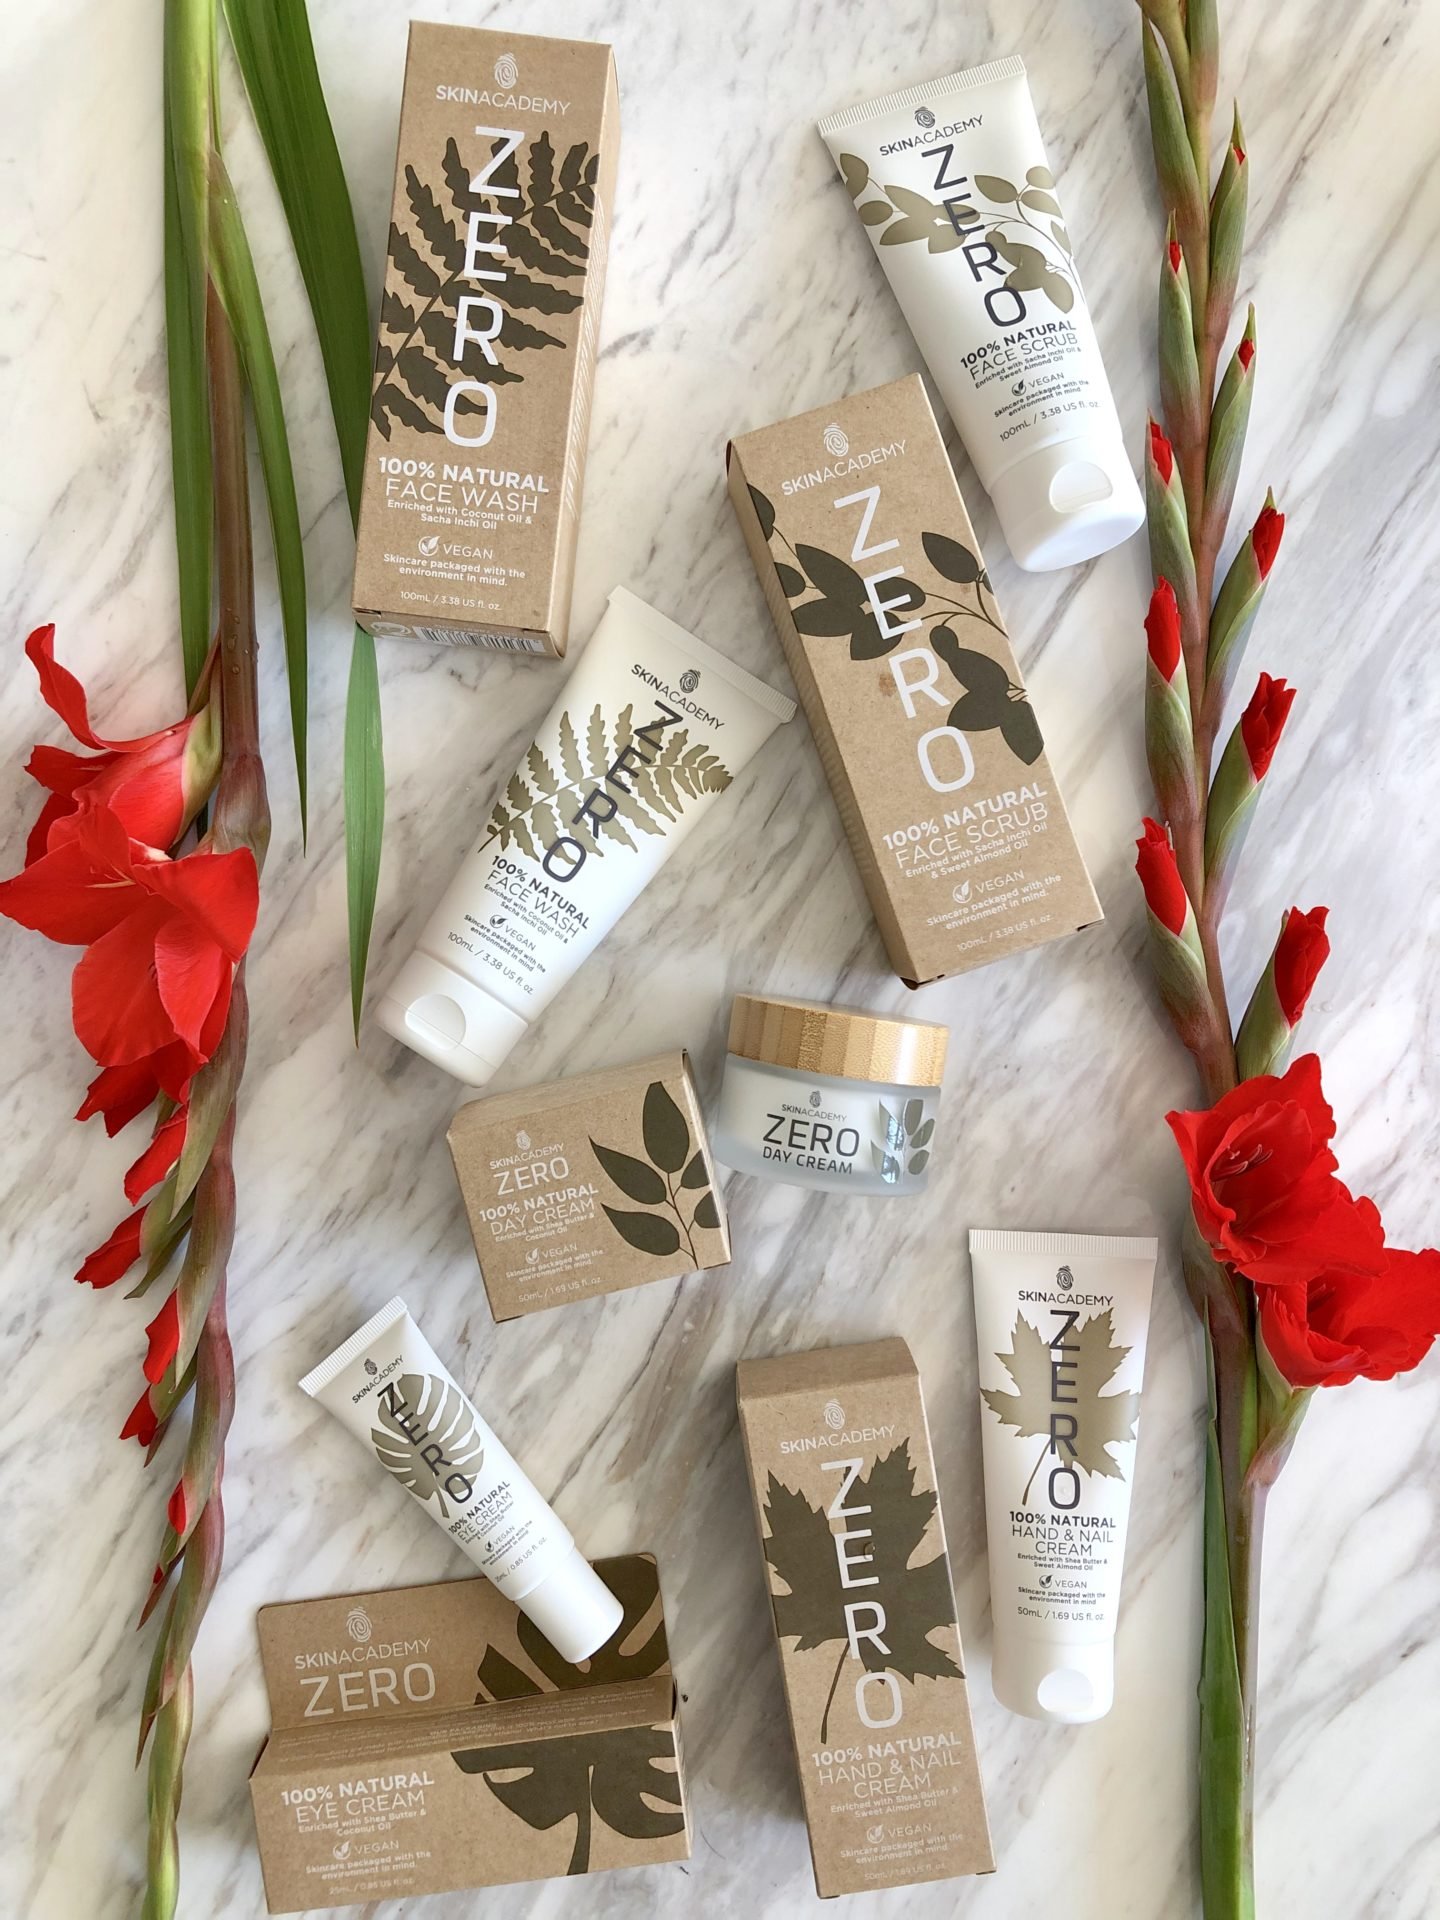 Skin Academy Zero skin care is a range of products such a face wash and day cream which are ultra hydrating as well as nourishing.  All of the Skin Academy Zero ingredients are 100% natural and vegan friendly!